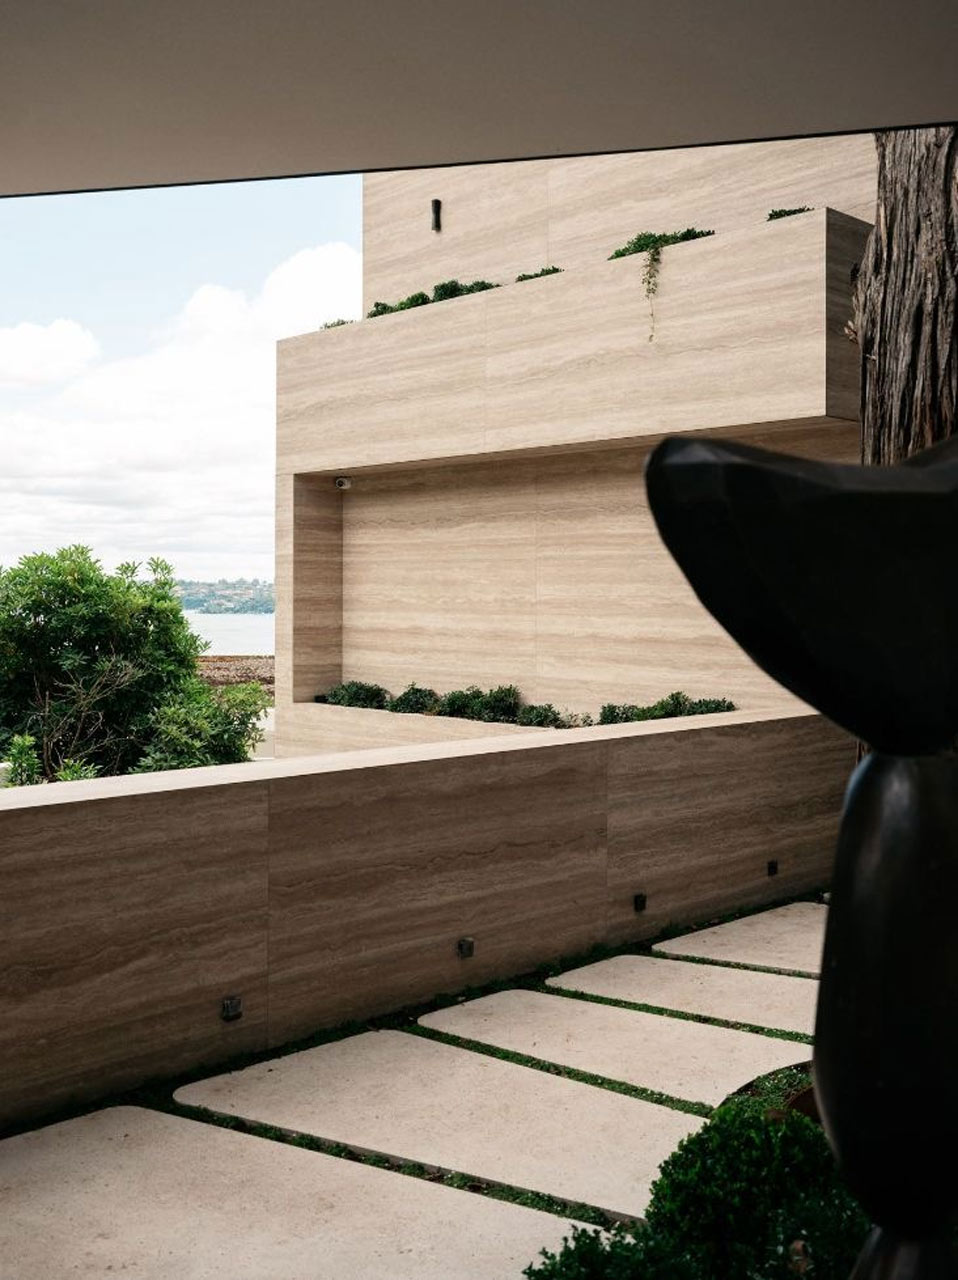 Perspective view from a garden, looking out to a layered wooden façade with integrated planters, under a clear sky, partially framed by a silhouette of a sculpture.